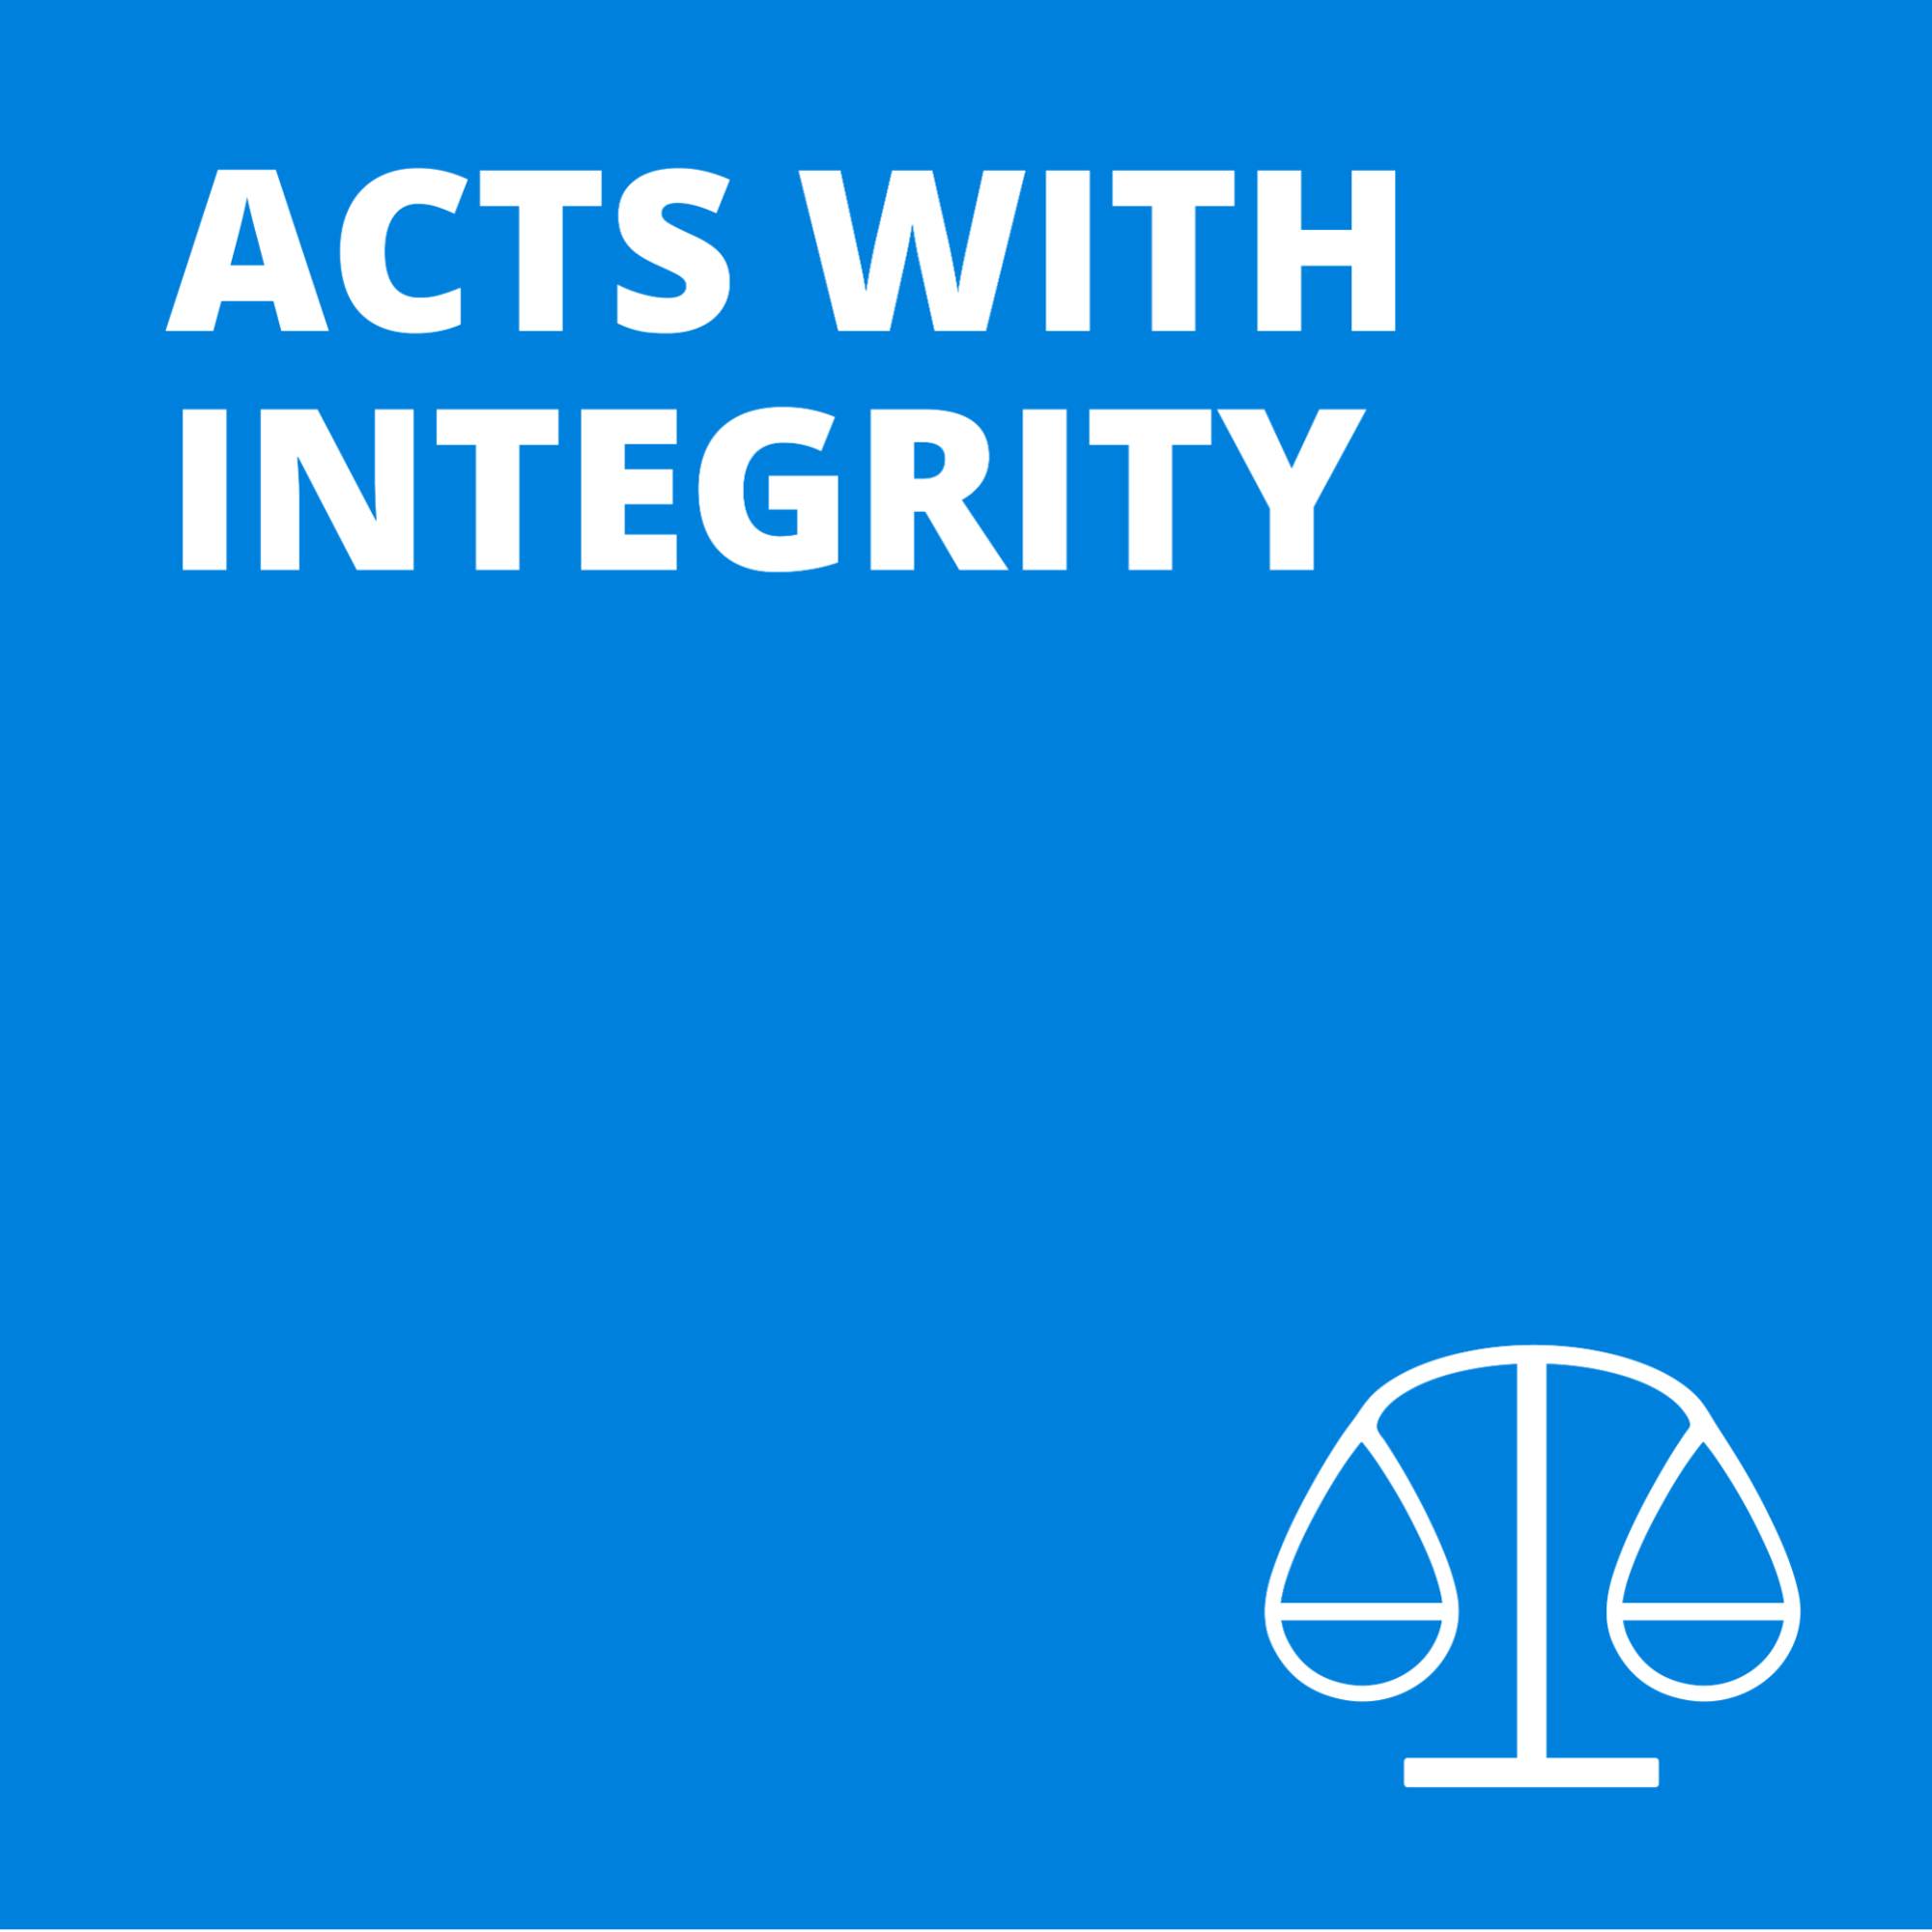 "Acts with Integrity" text with balance icon